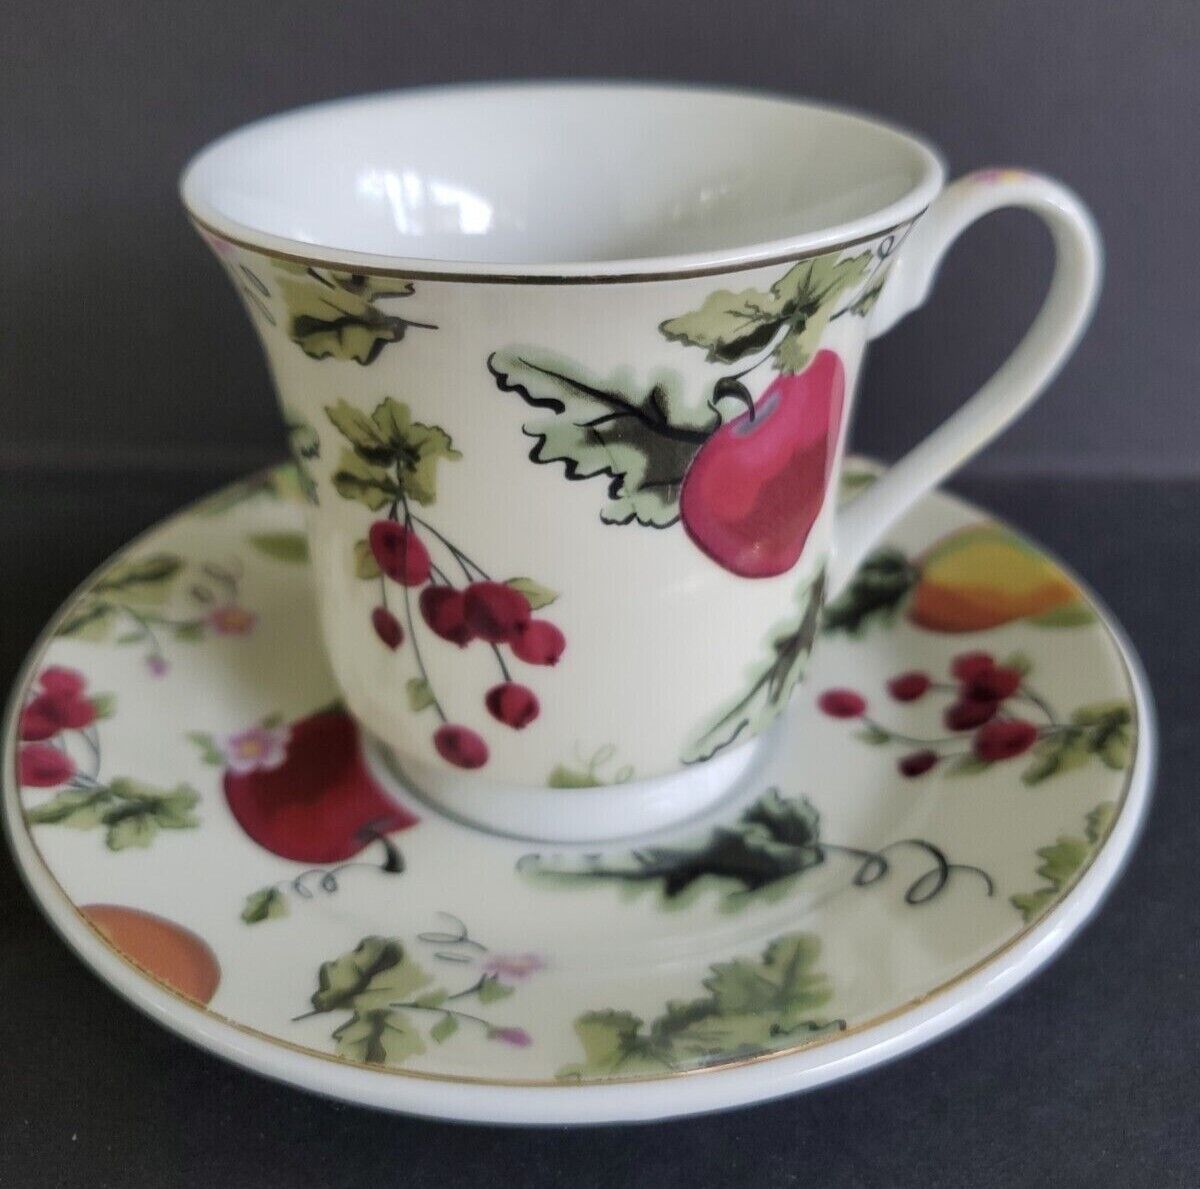 DARICE Tea Cup Fruit Apples and Cherries Teacup and Saucer Set - Floral